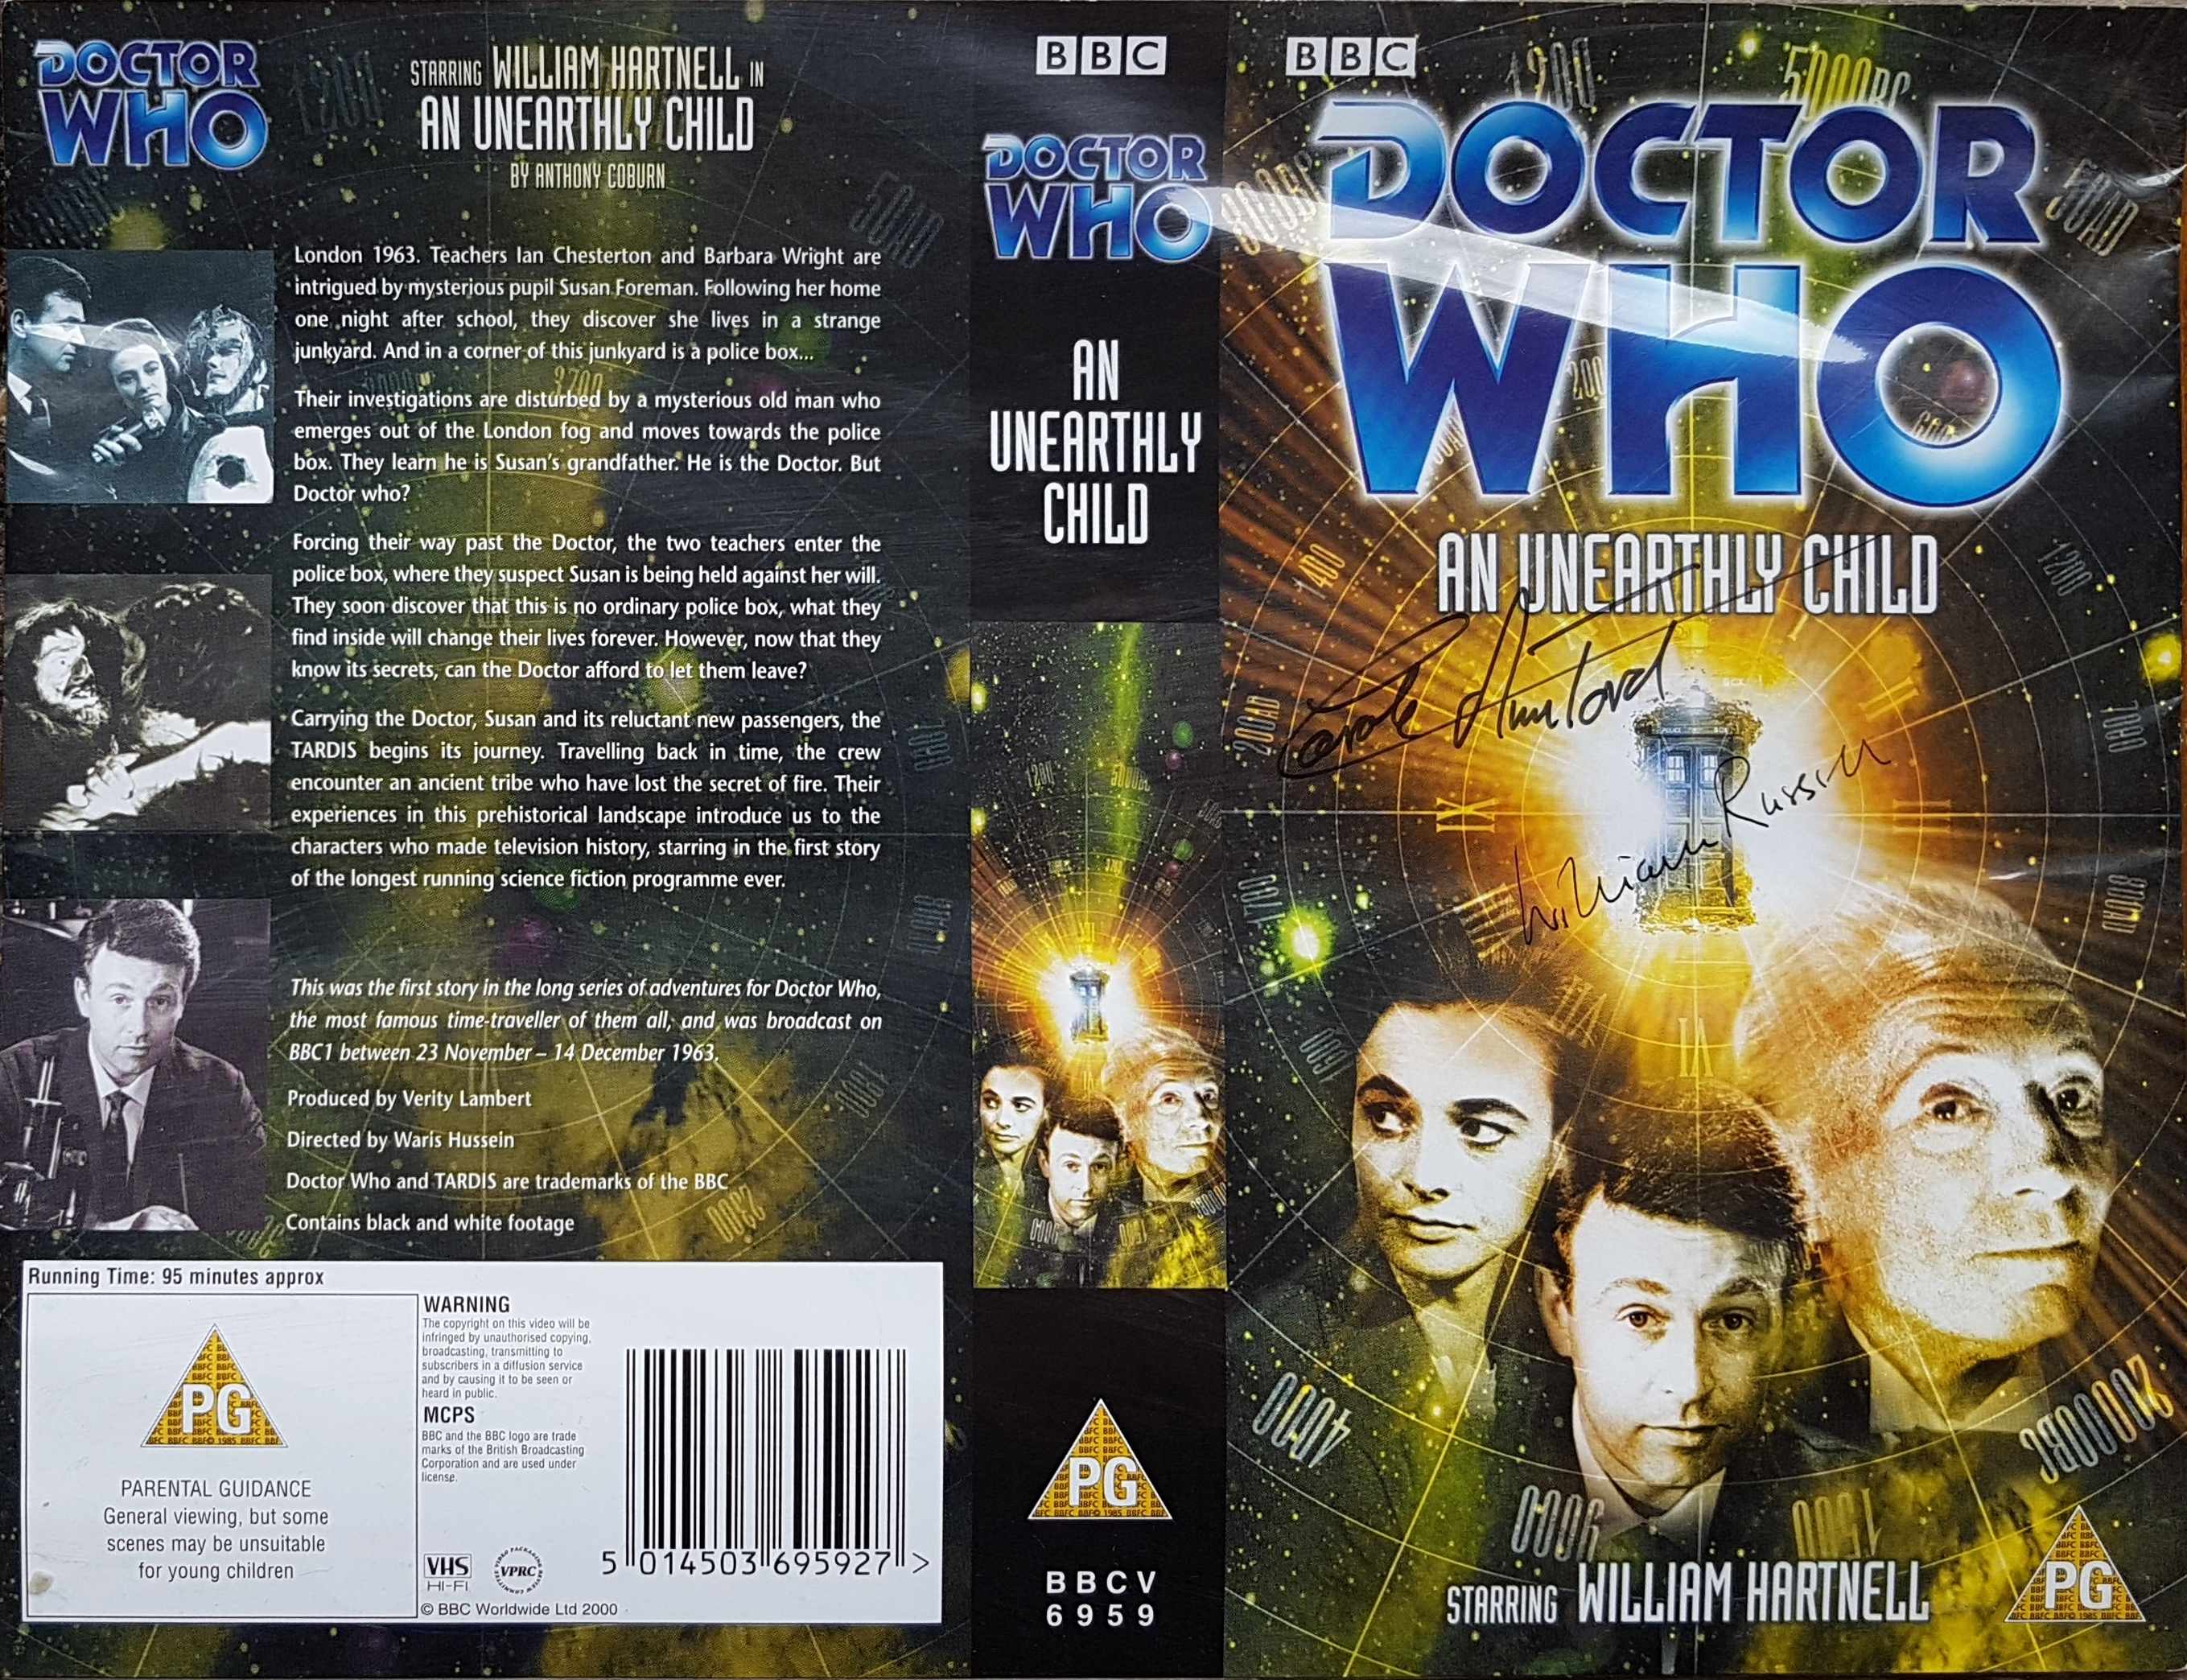 Picture of Doctor Who - An unearthly child by artist Anthony Coburn from the BBC videos - Records and Tapes library